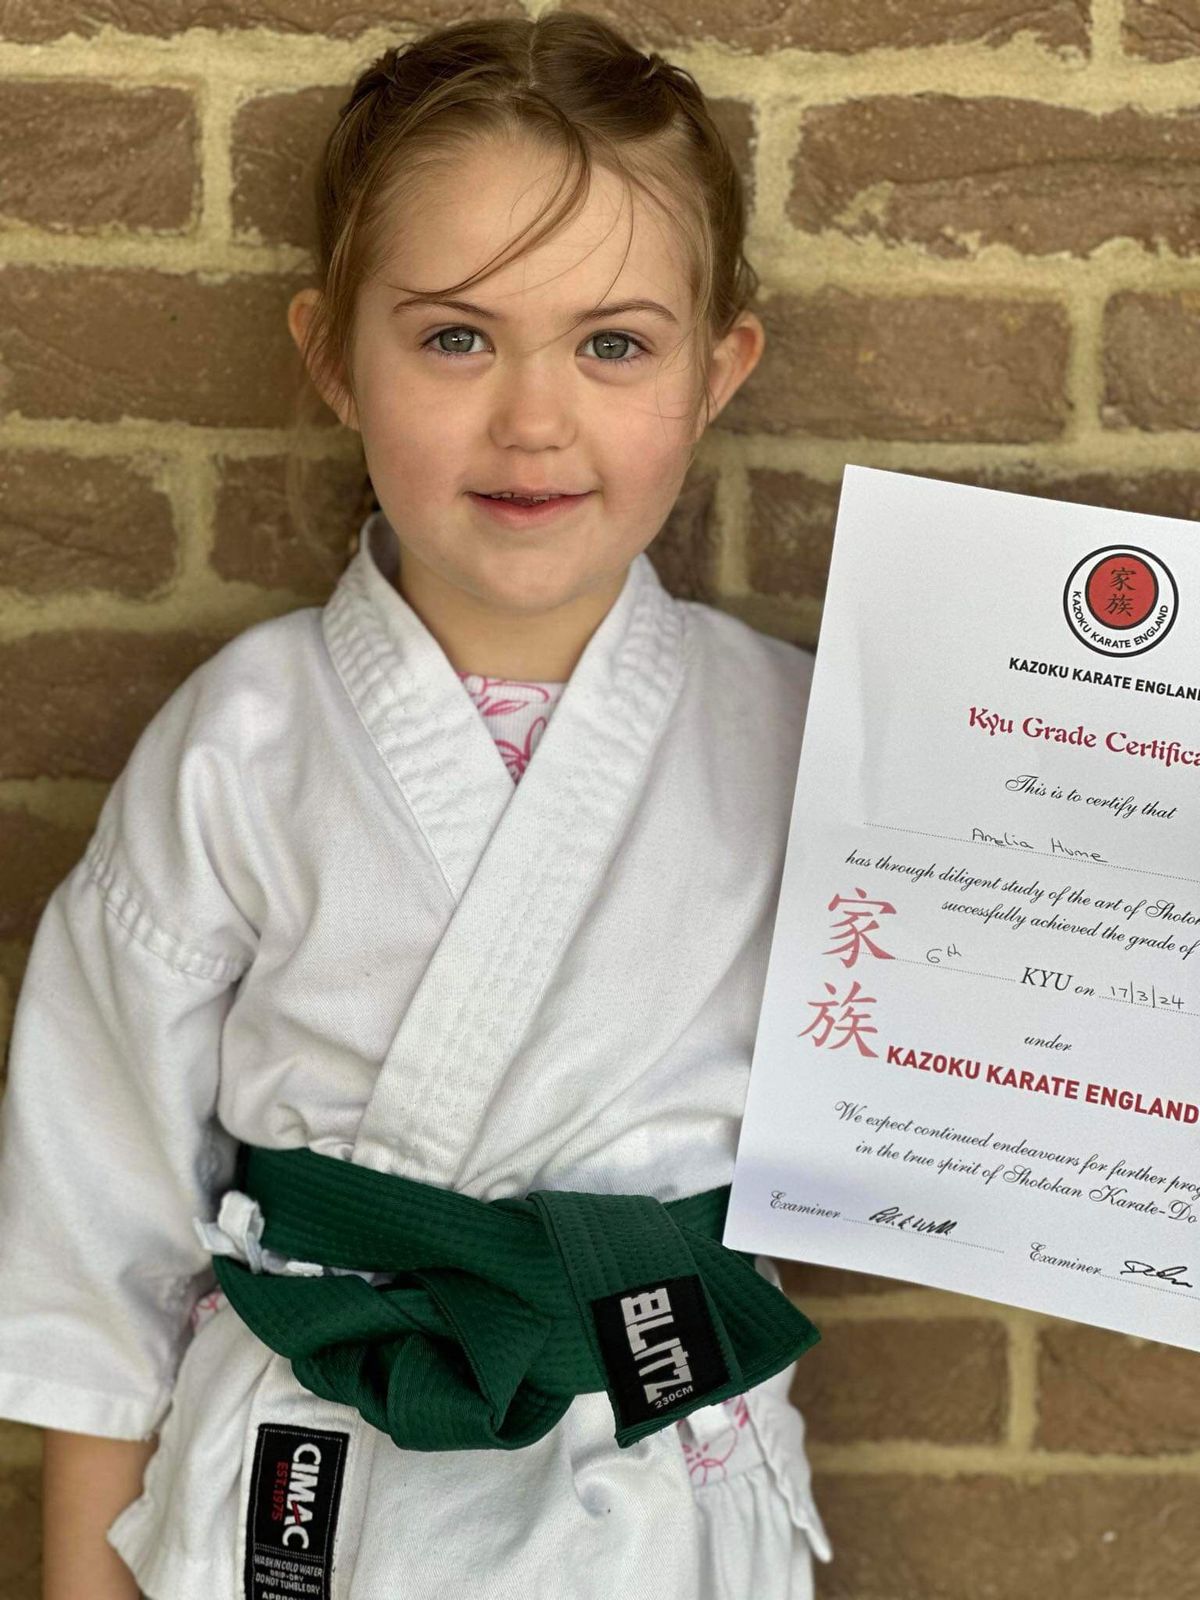 Club Summer course and kyu grading 